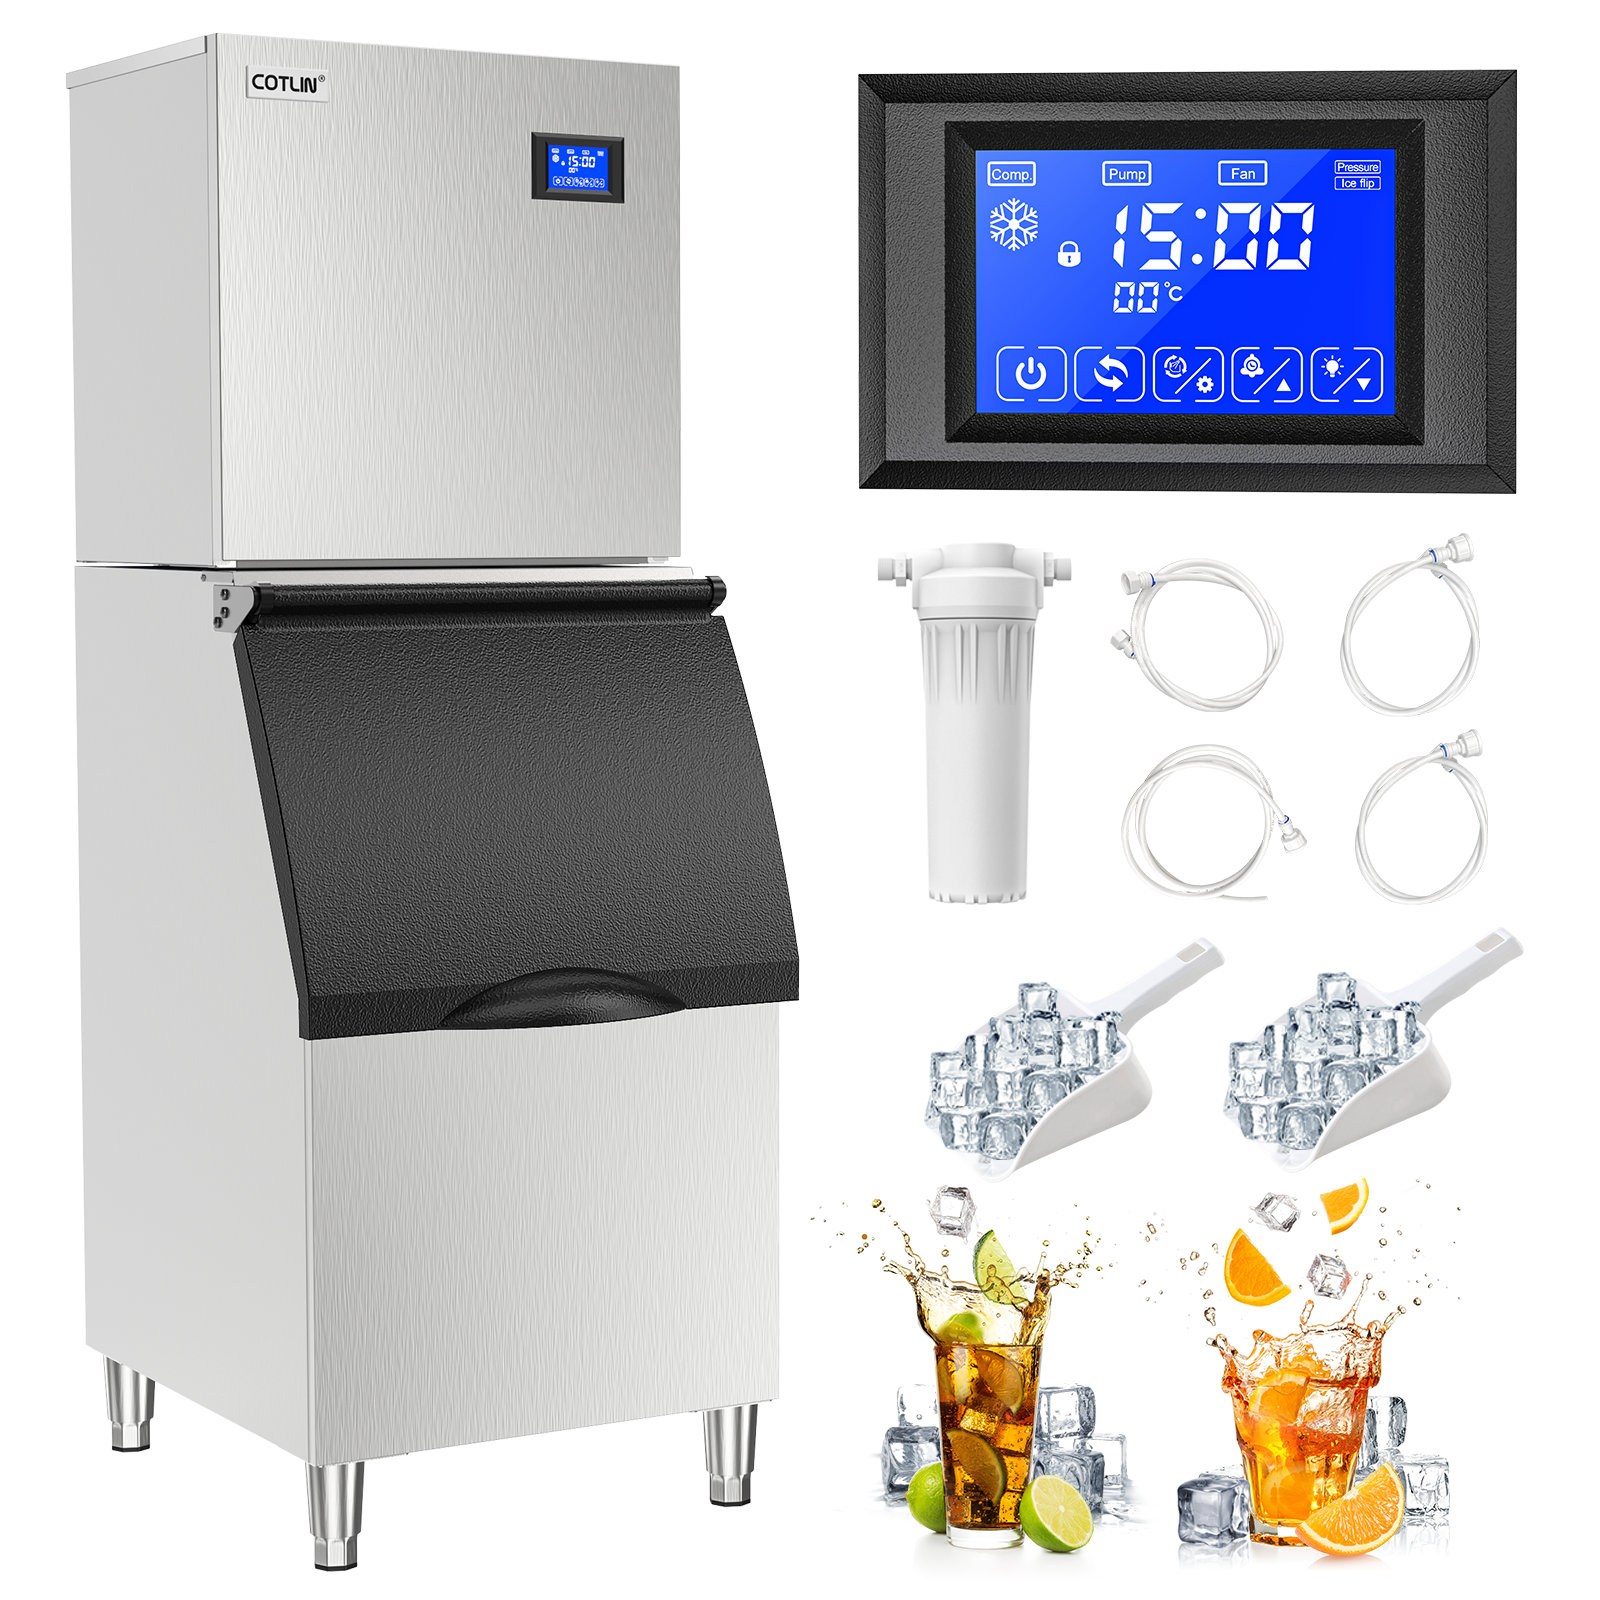 Velivi Commercial Ice Maker 200 lb./24 H Freestanding Ice Maker Machine with 55 lb. Storage, Stainless Steel, Silver